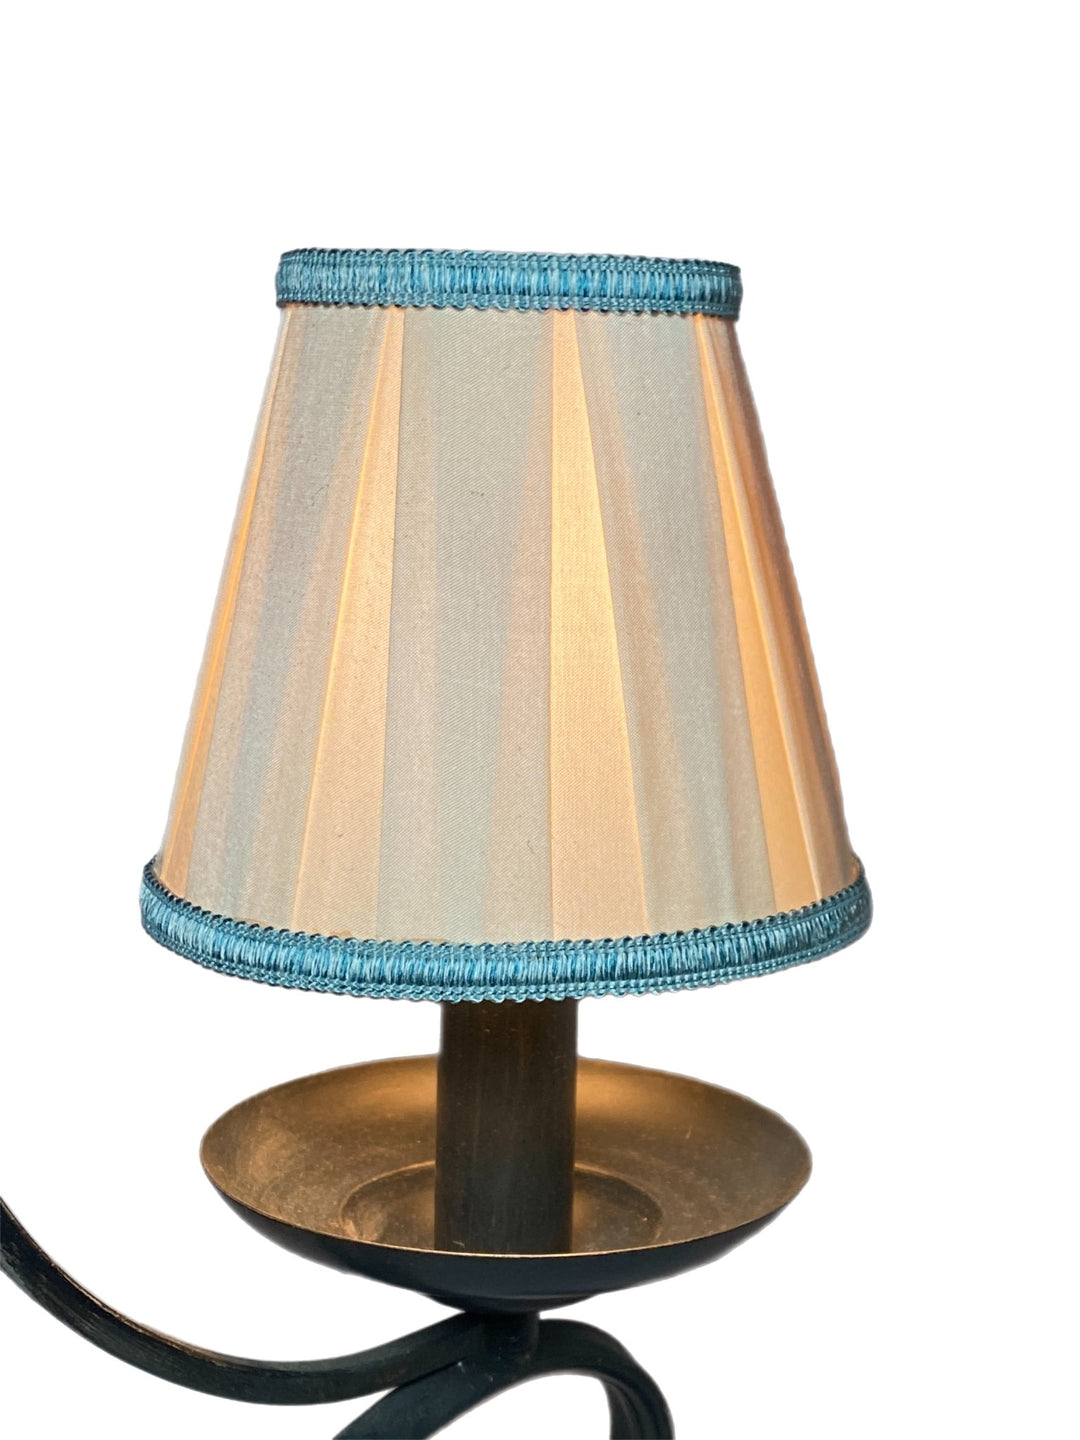 Box Pleat Silk Chandelier Lamp Shade - Available in Three Sizes + Add Custom Gimp - Lux Lamp Shades